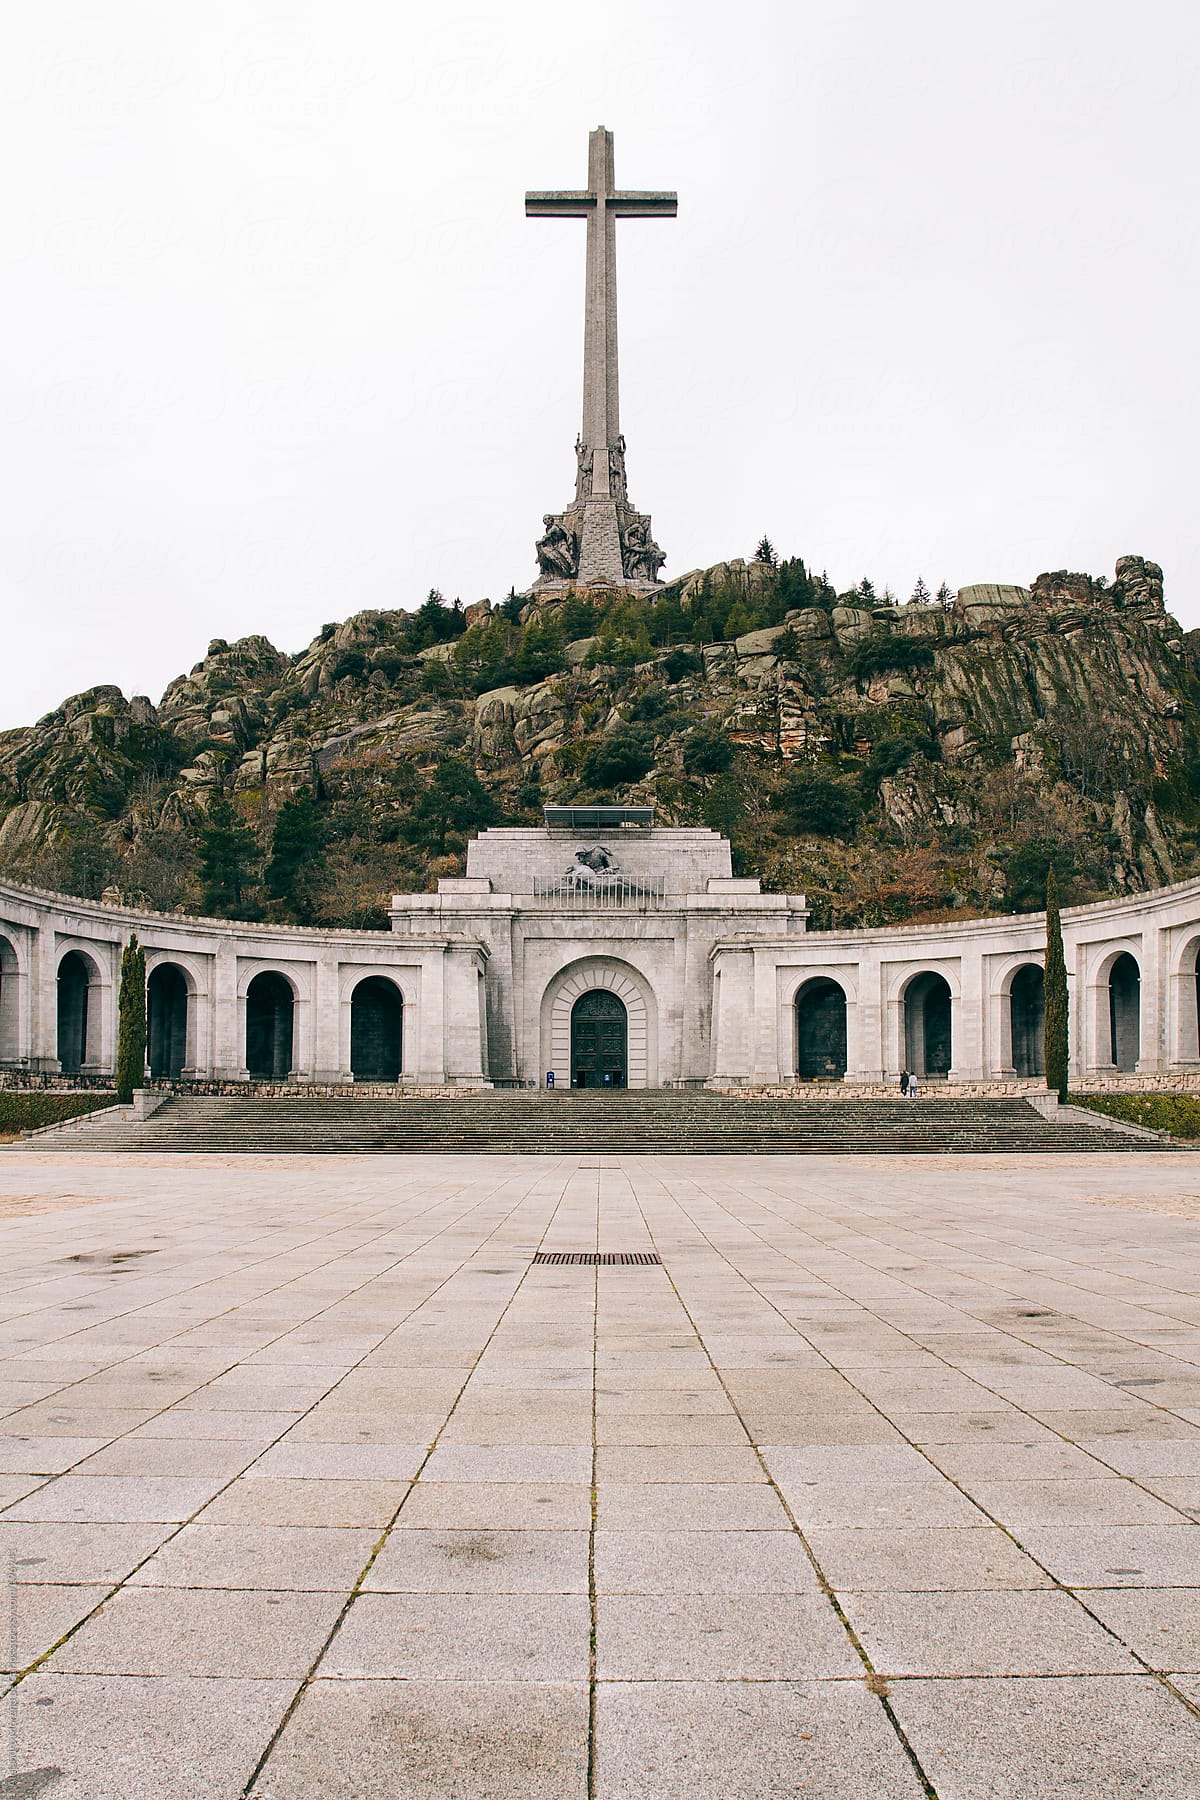 Cross monument and basilica on a mountain